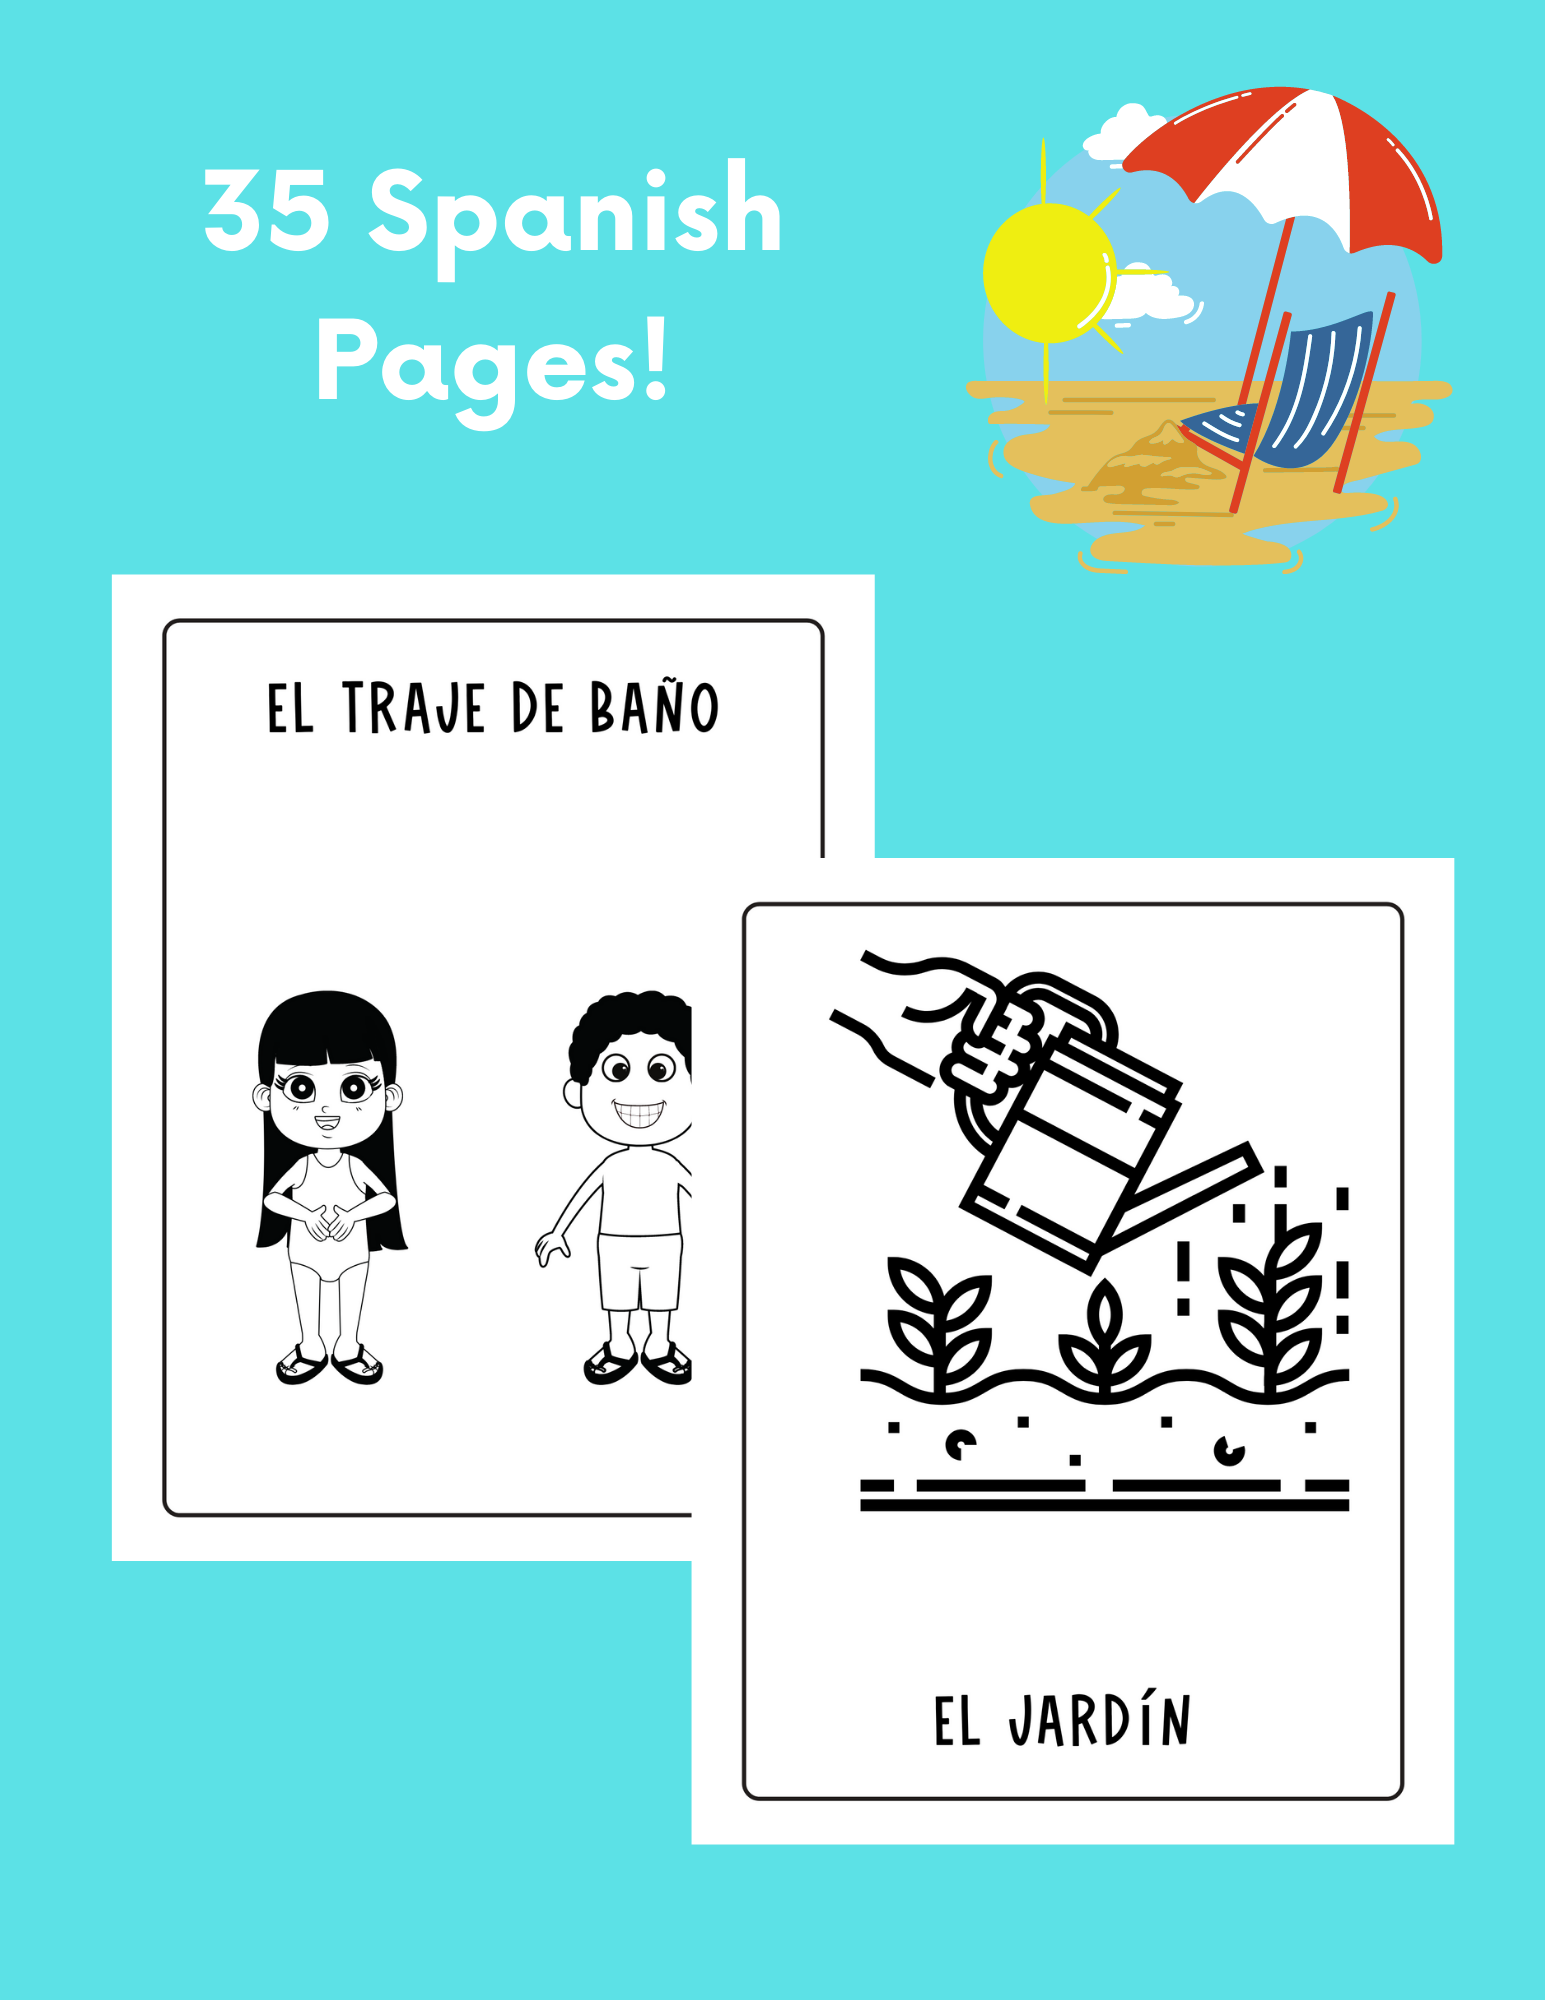 2 sample pages of coloring pages with spanish vocabulary on them against a light blue background.